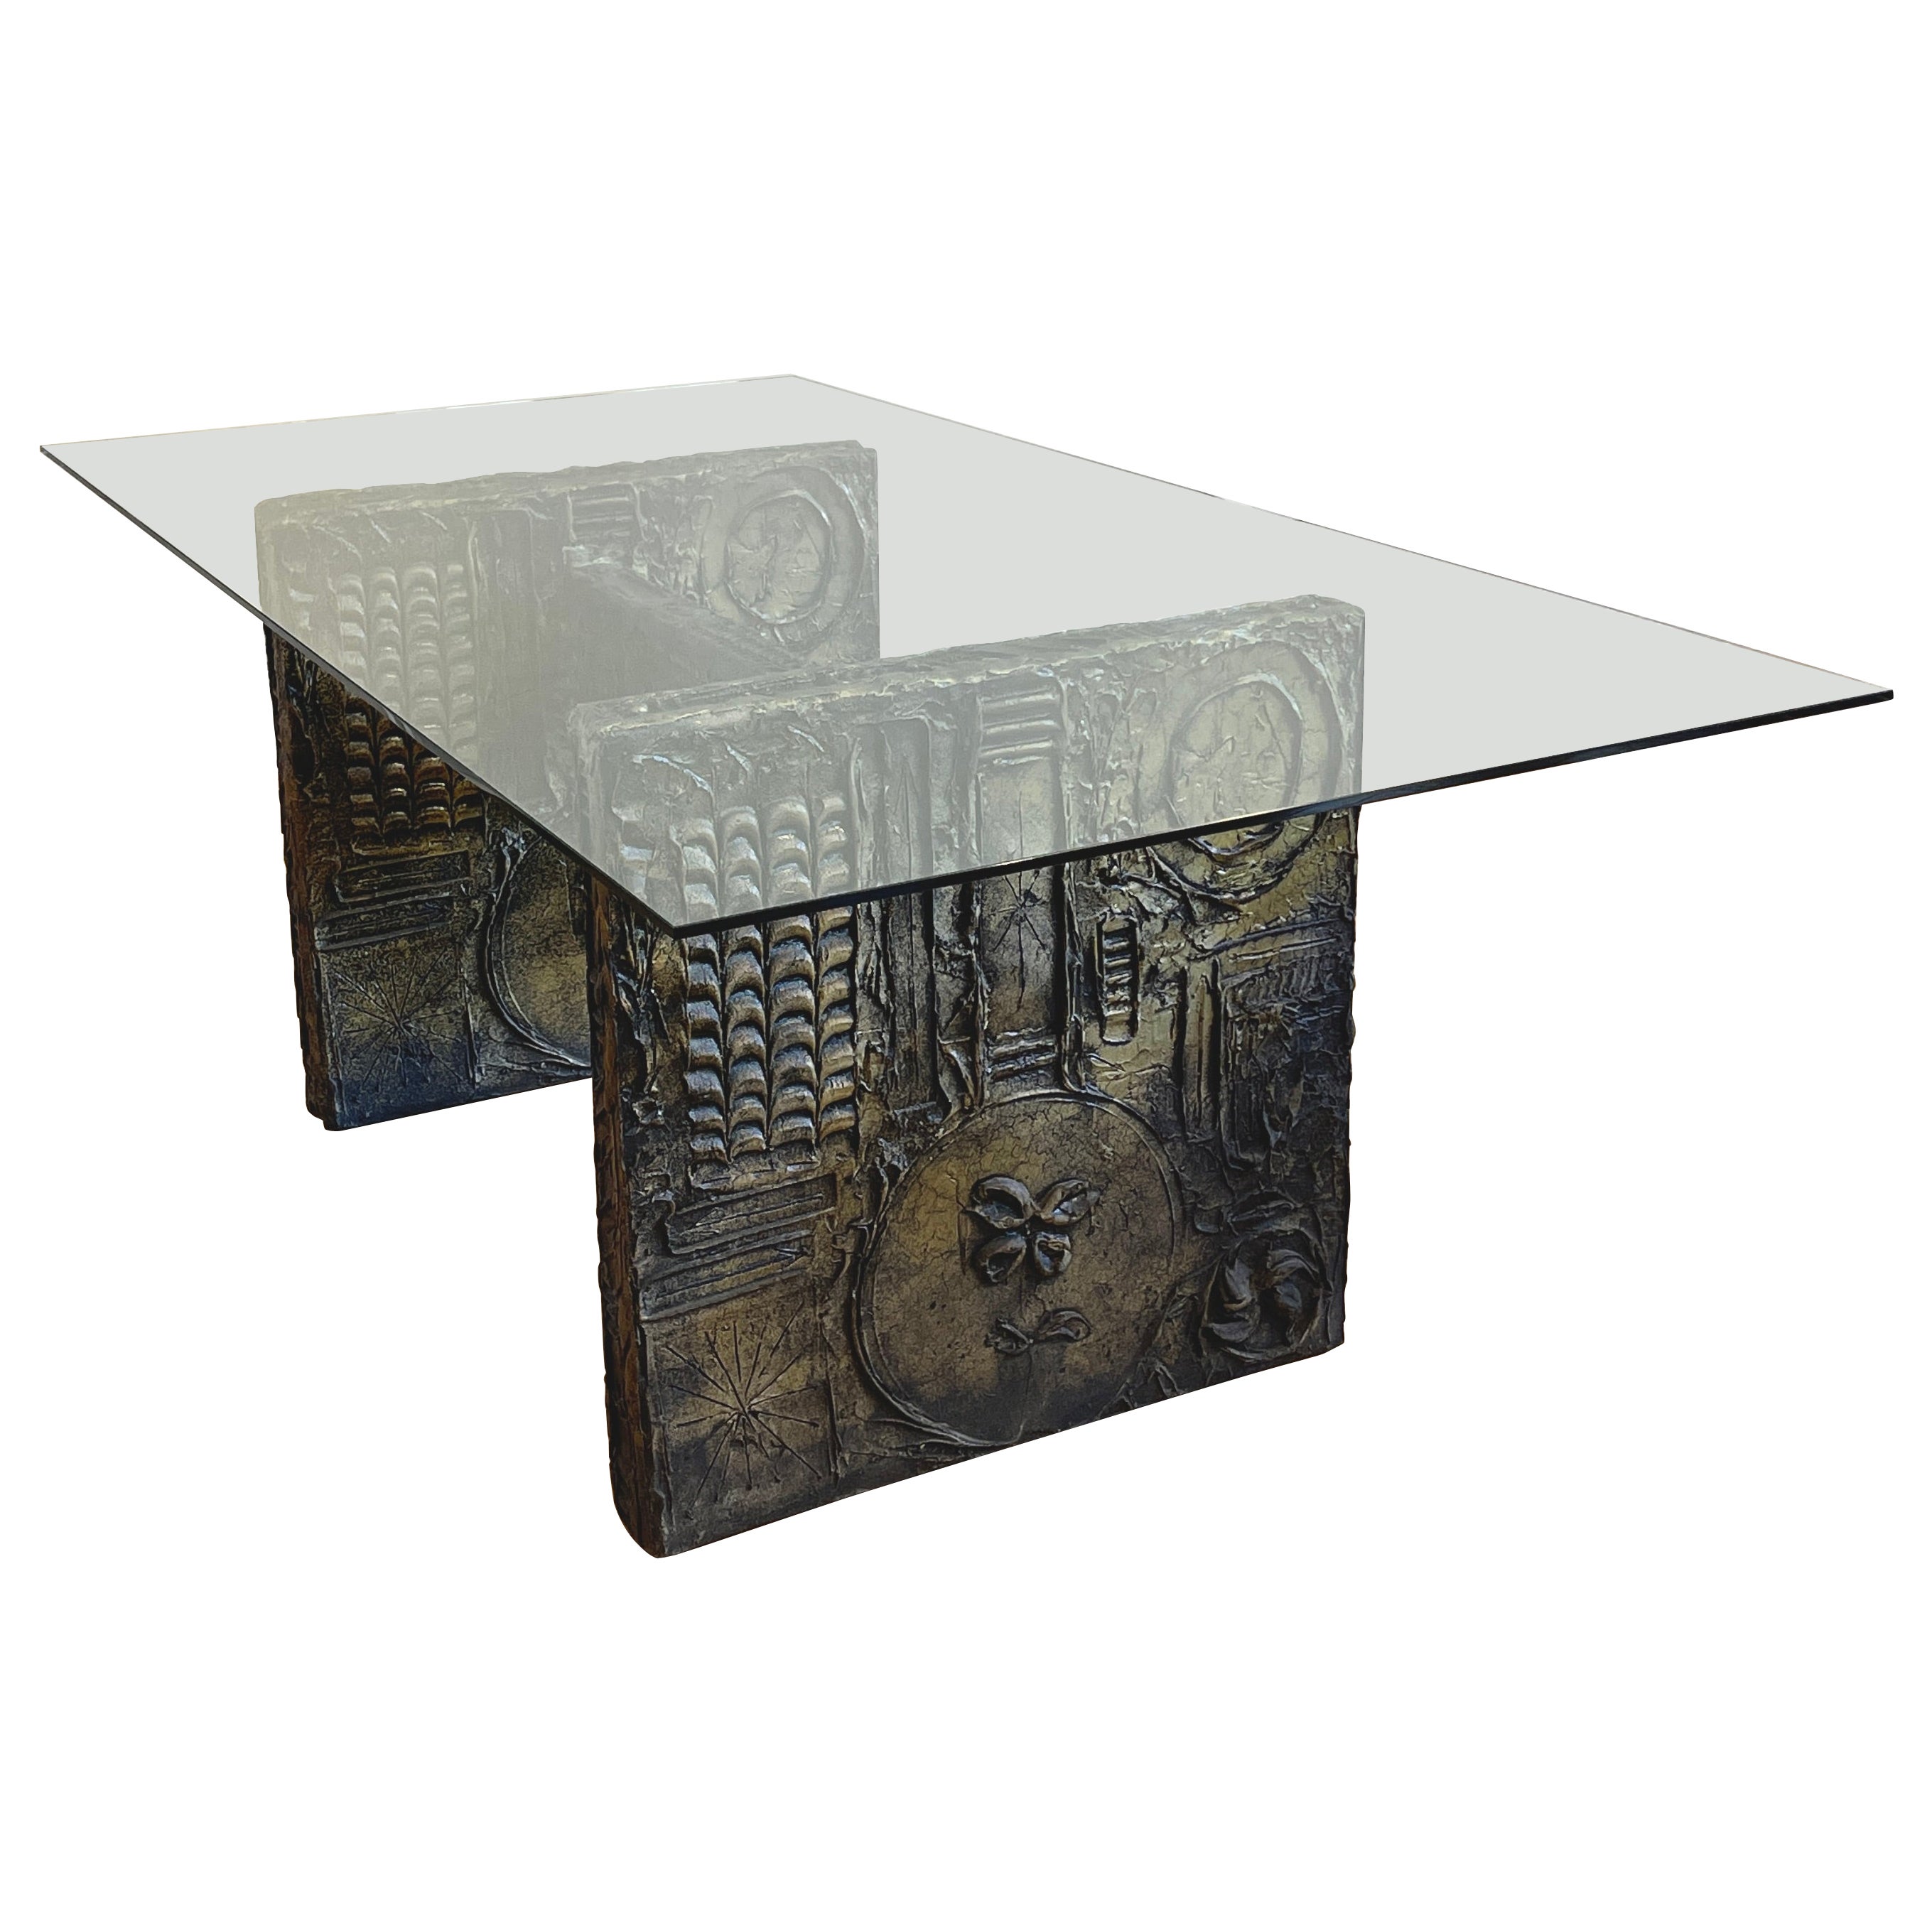 Adrian Pearsall for Craft Associates Brutalist Glass Top Dining Table / Desk